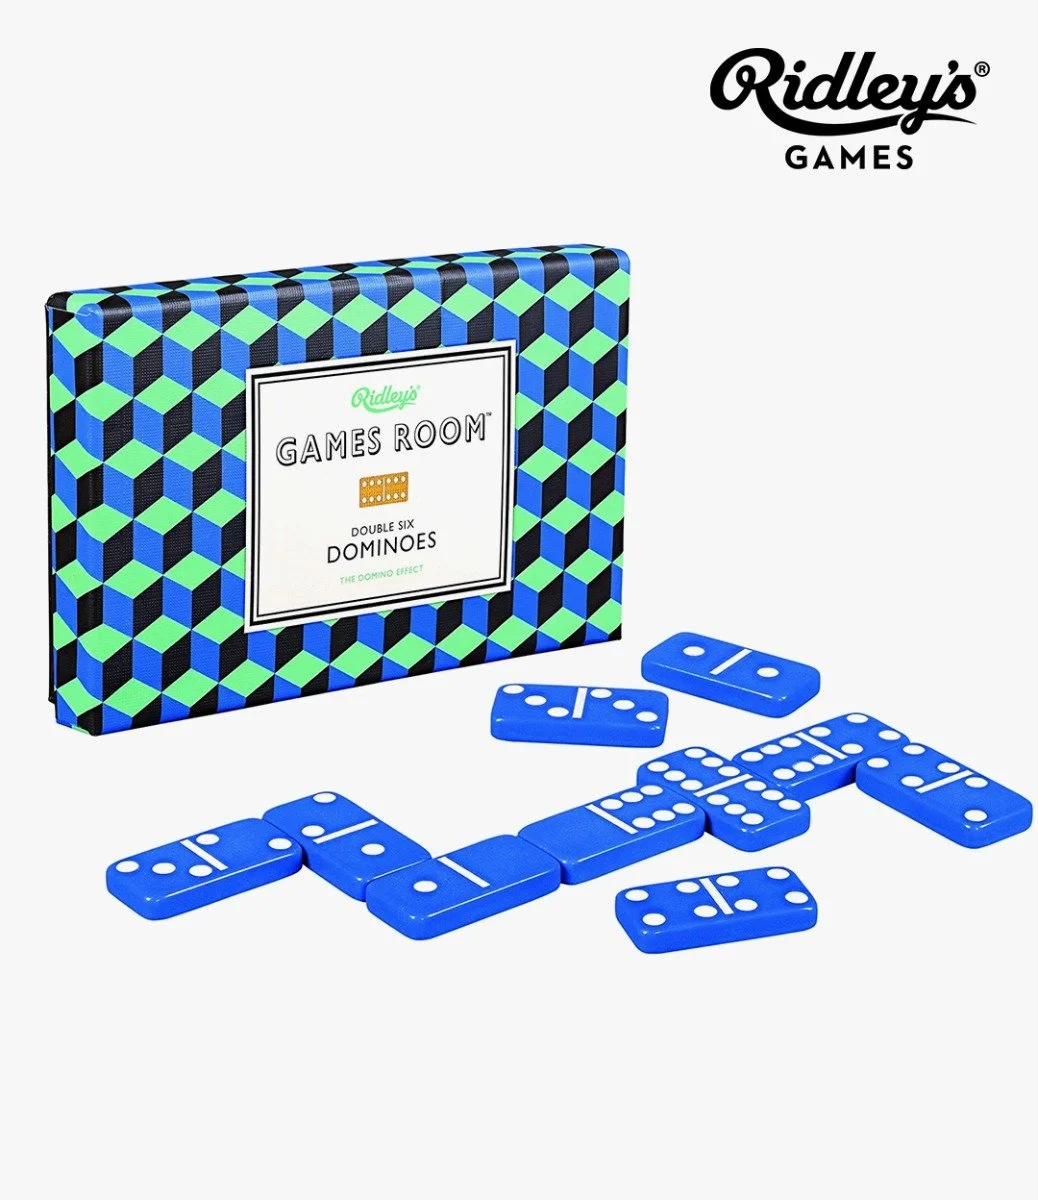 Dominoes by Ridley's